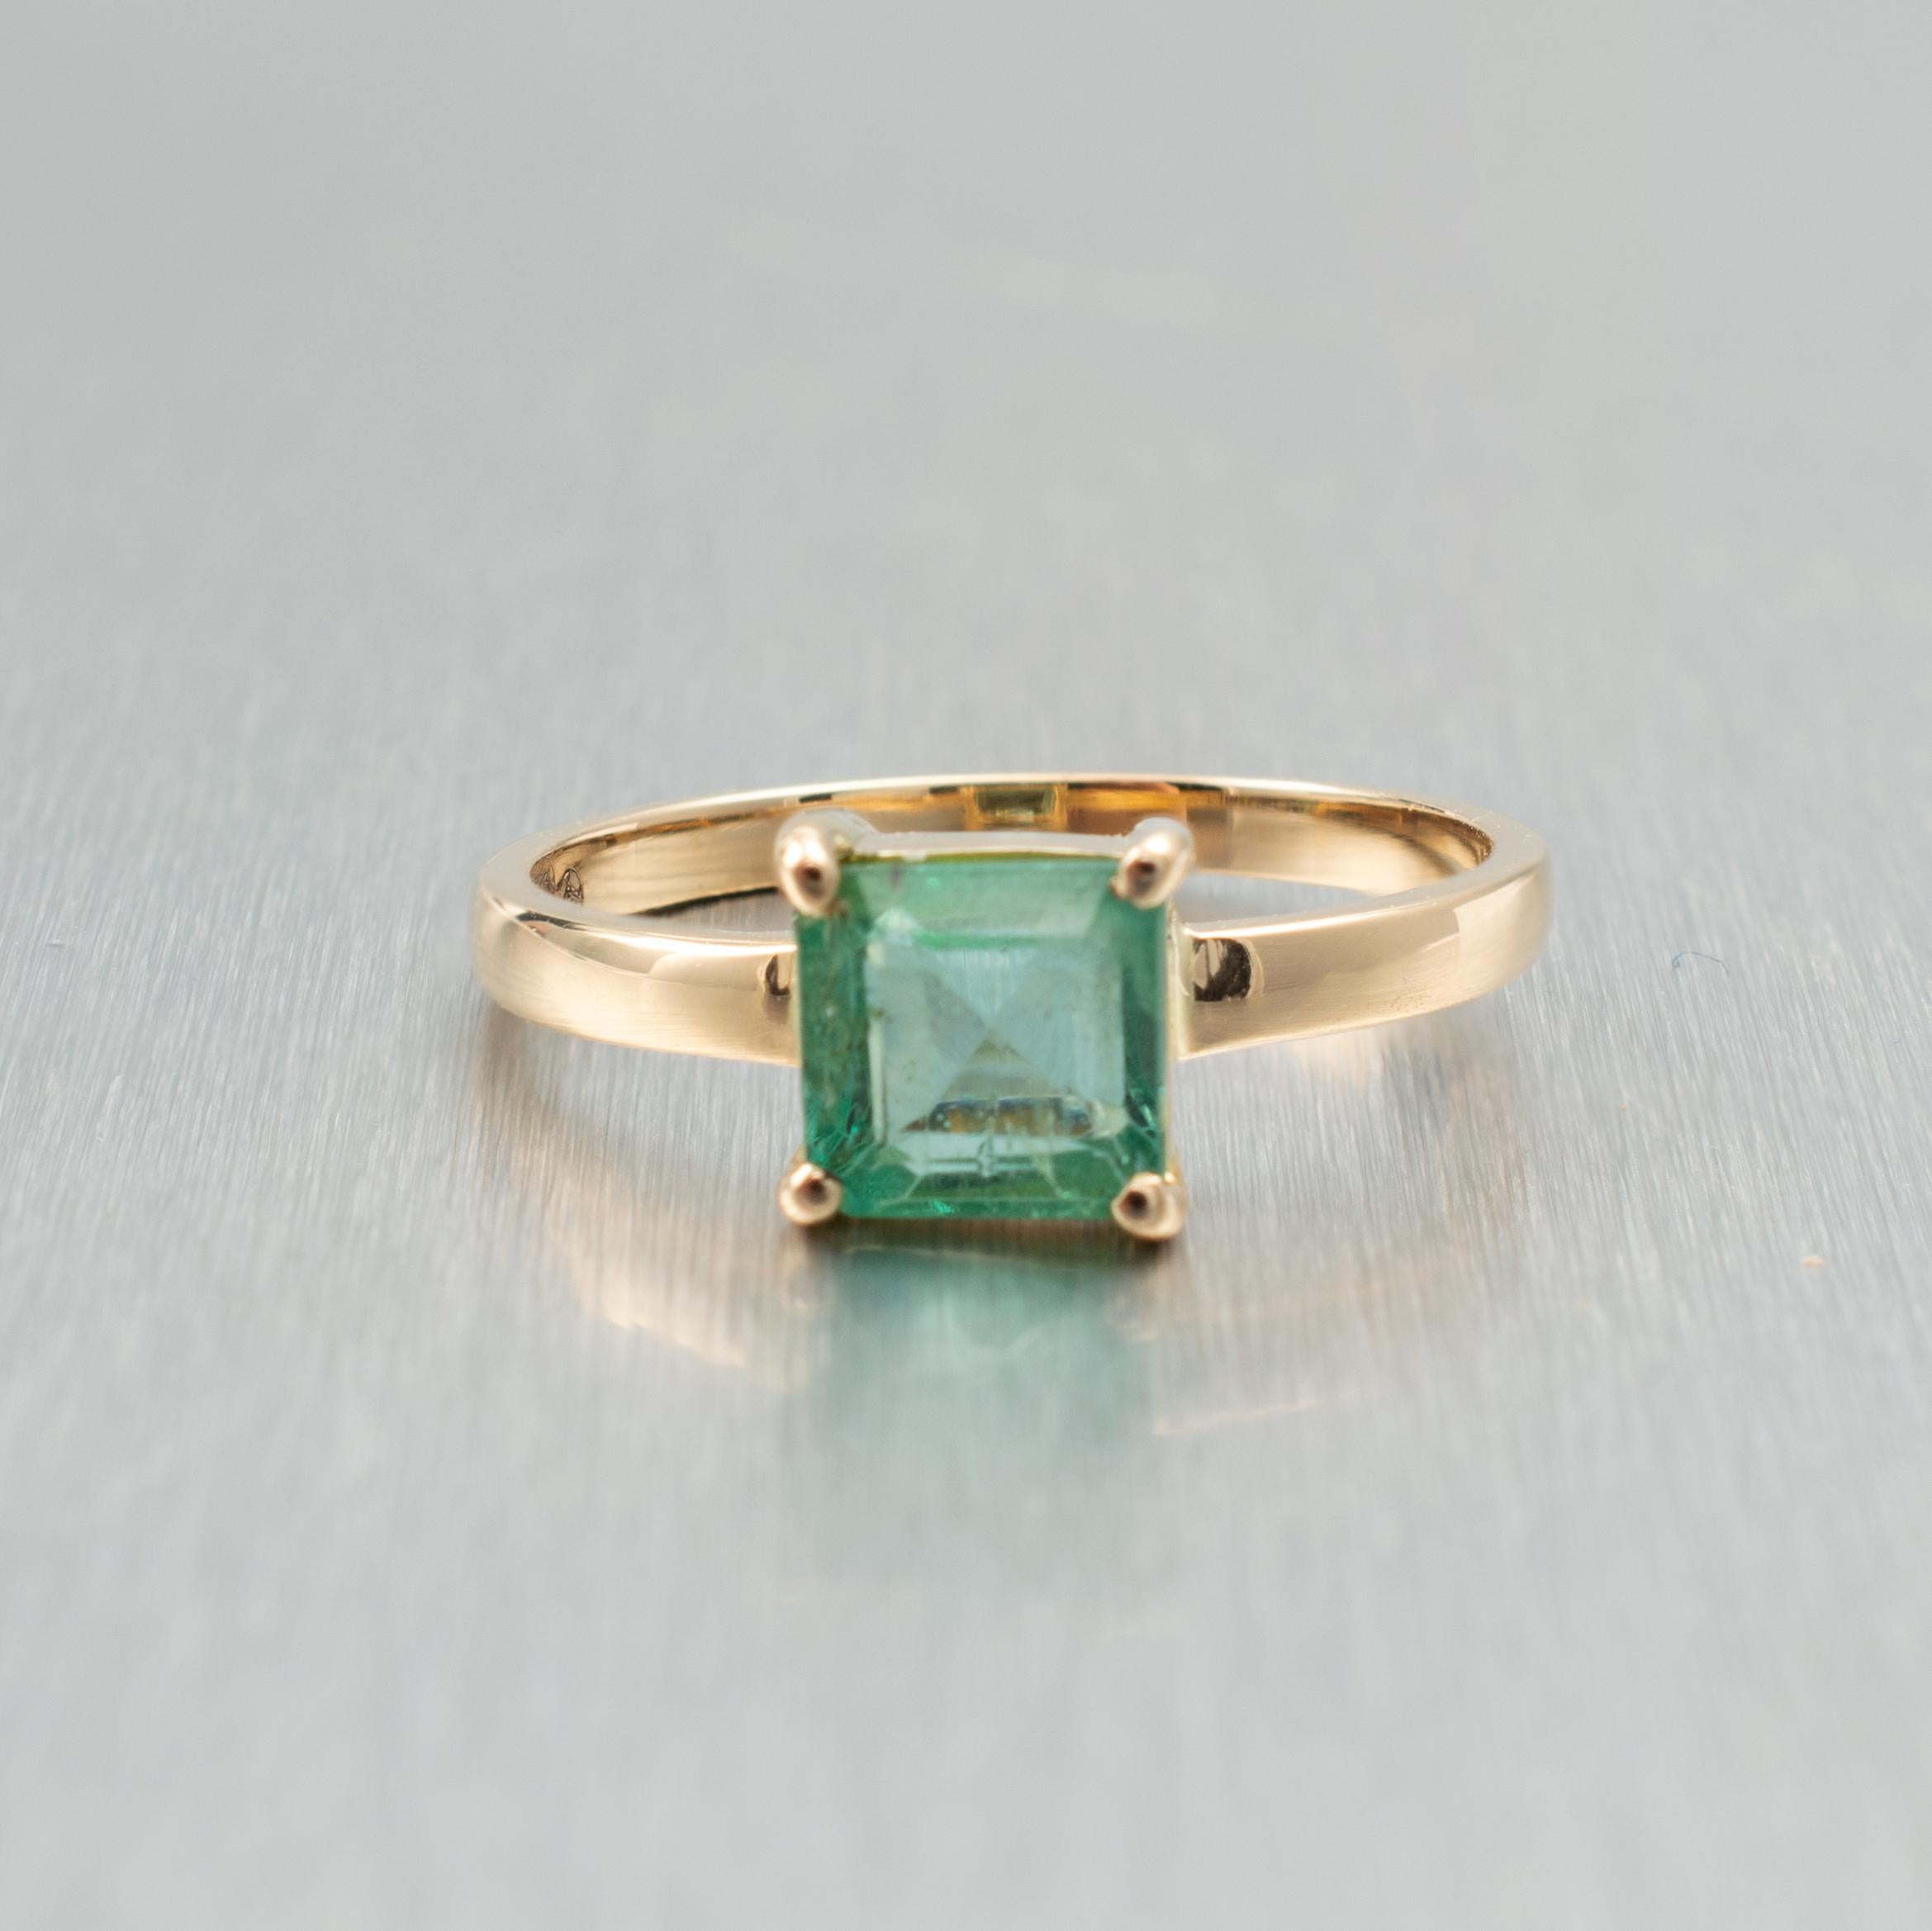 This Emerald solitaire ring, crafted in 18 karat yellow gold, displays a gorgeous natural gemstone that is approx 1.5 carats. The natural Columbian emerald has a lovely translucent shade of green showing its natural inclusions.

The ring is fully